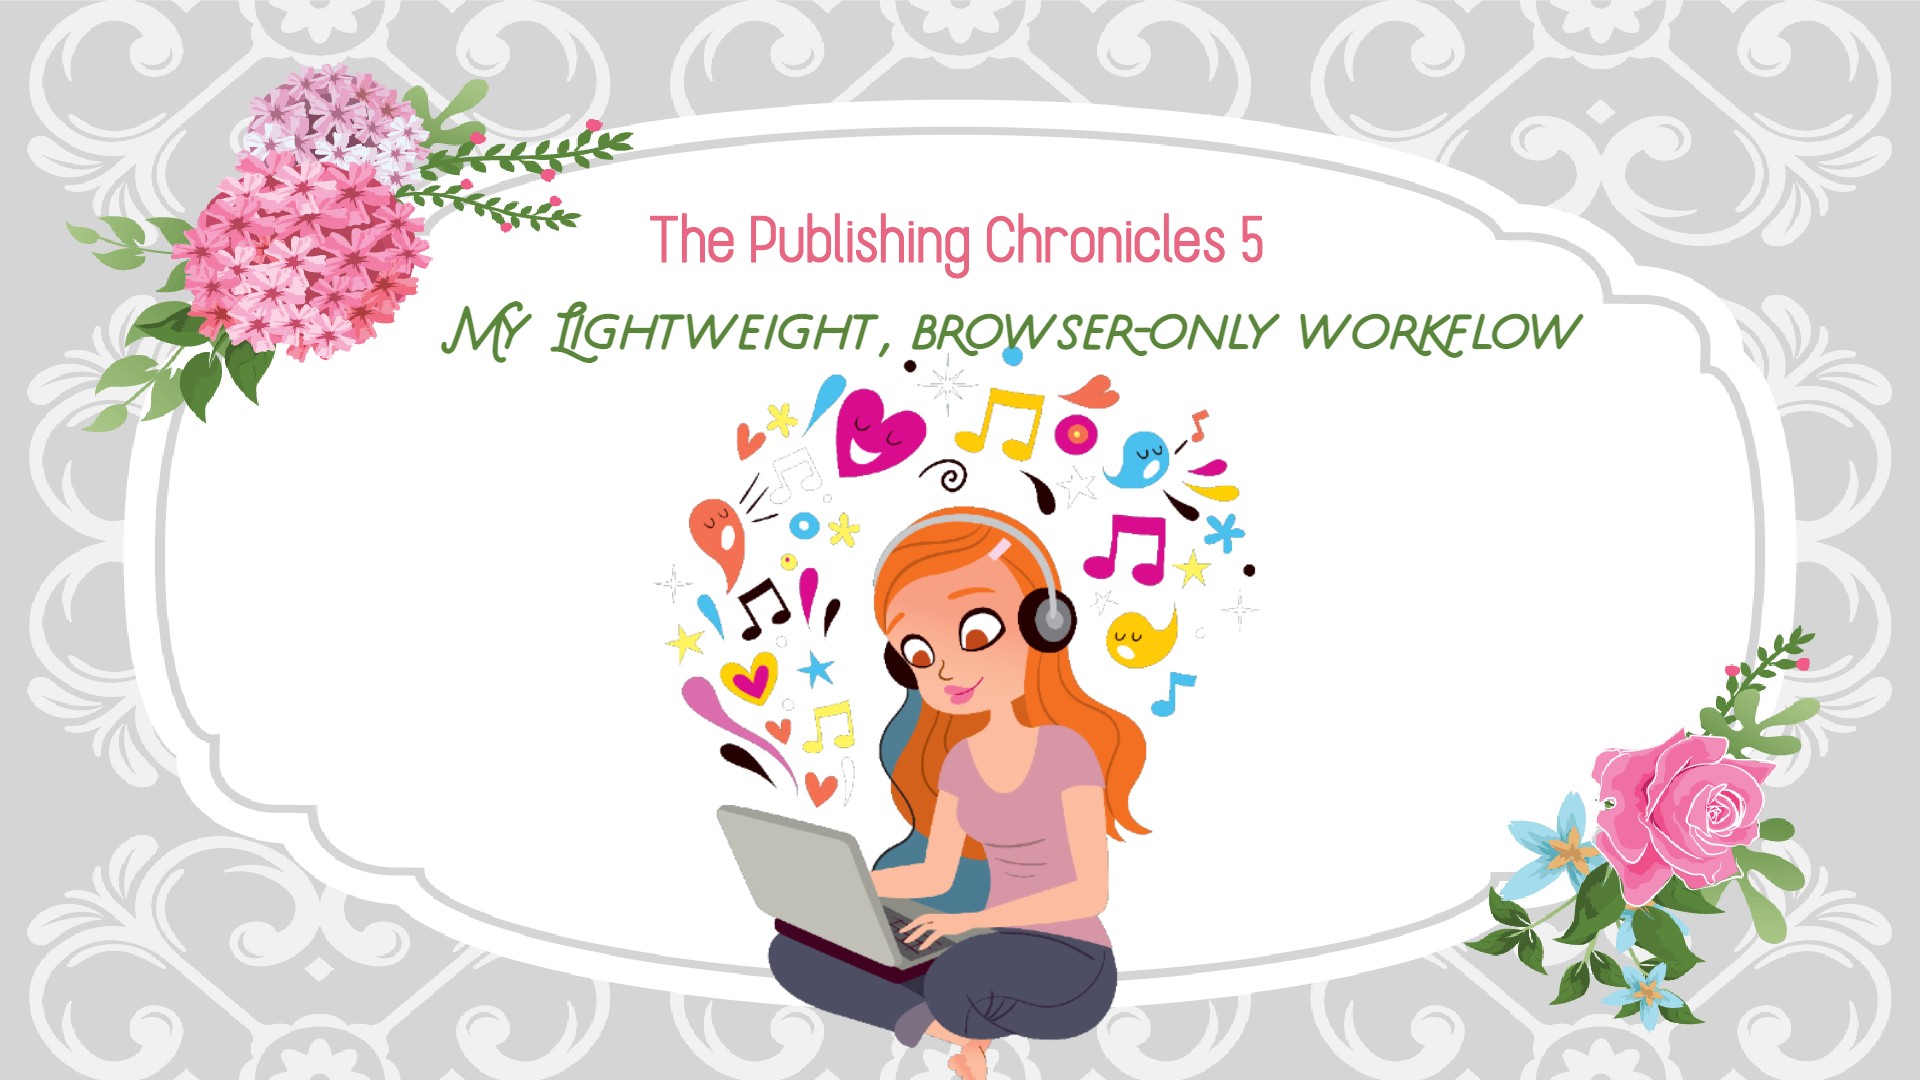 The Publishing Chronicles 5: My Lightweight, Browser-Only Workflow